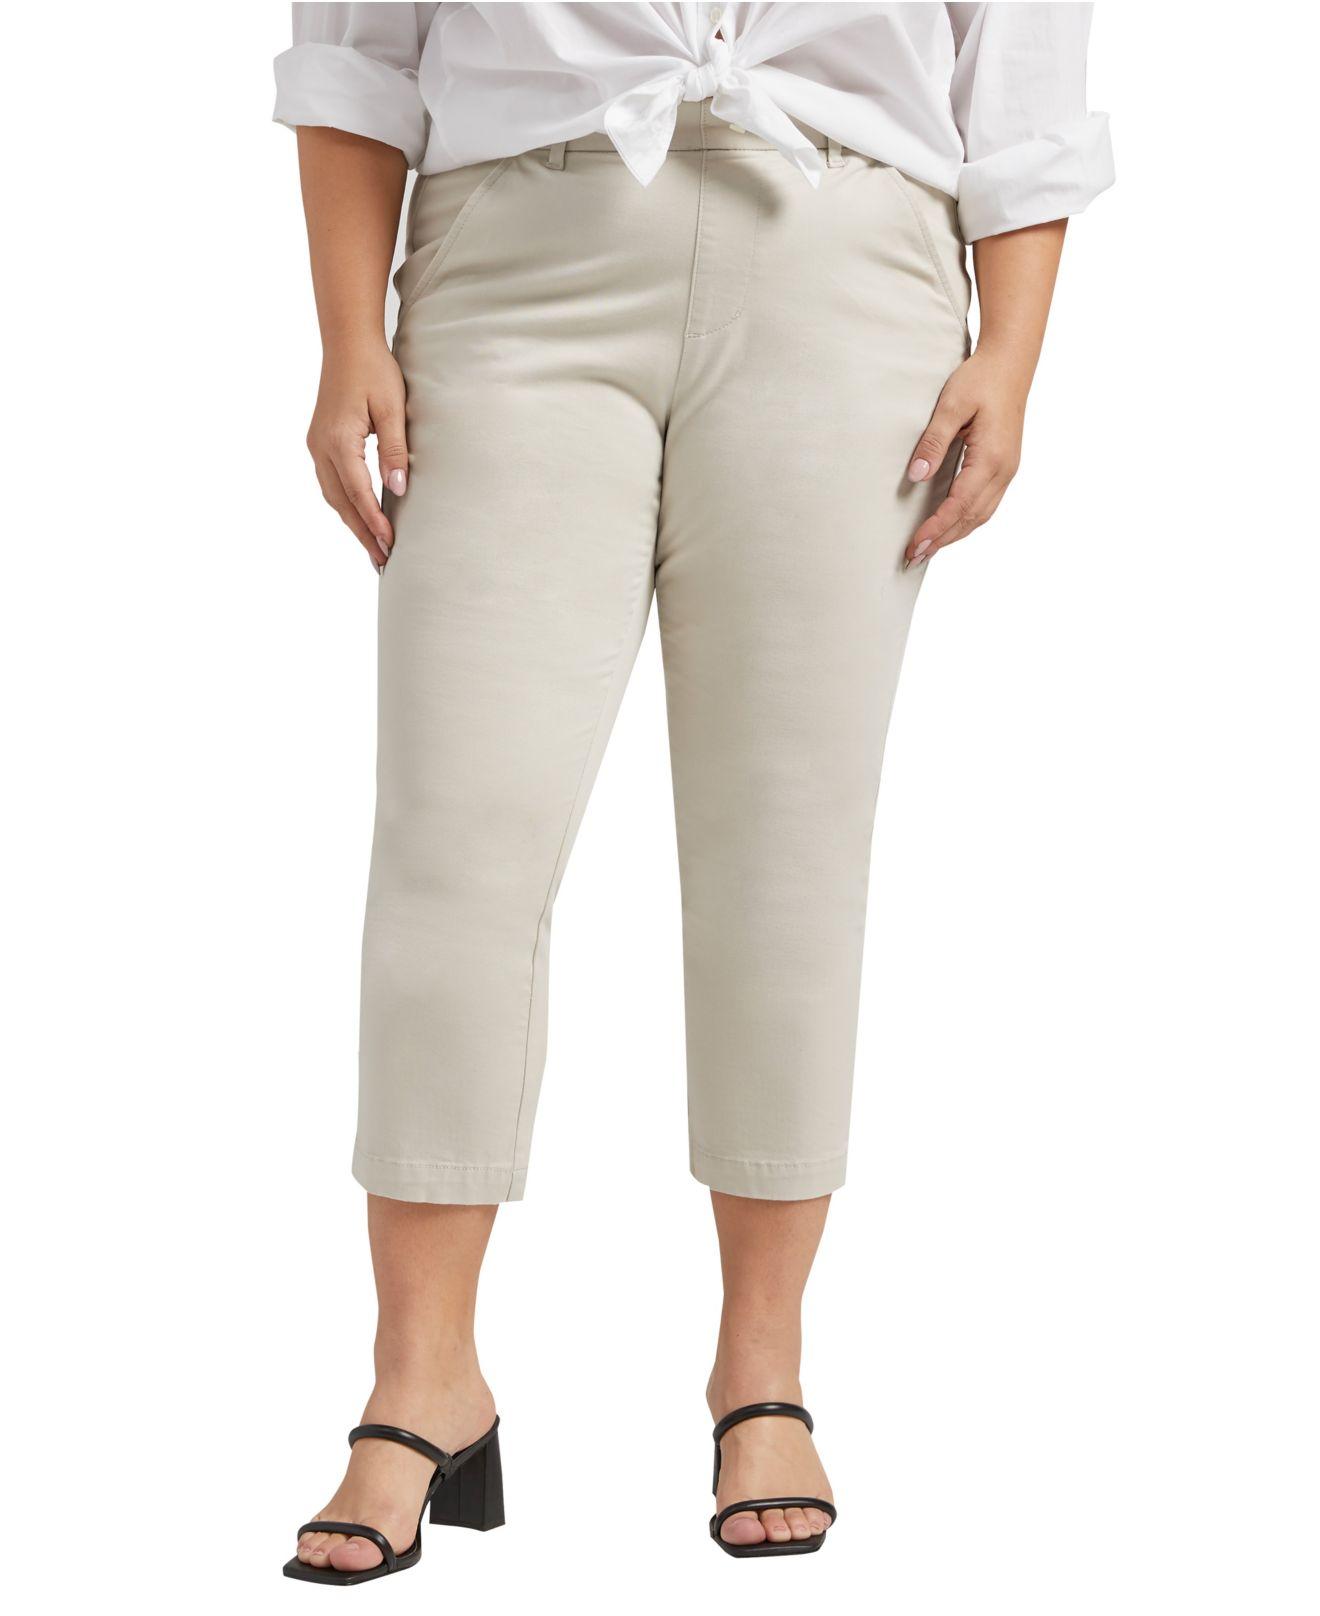 Jag Plus Size Maddie Mid Rise Capri Pants in Natural | Lyst